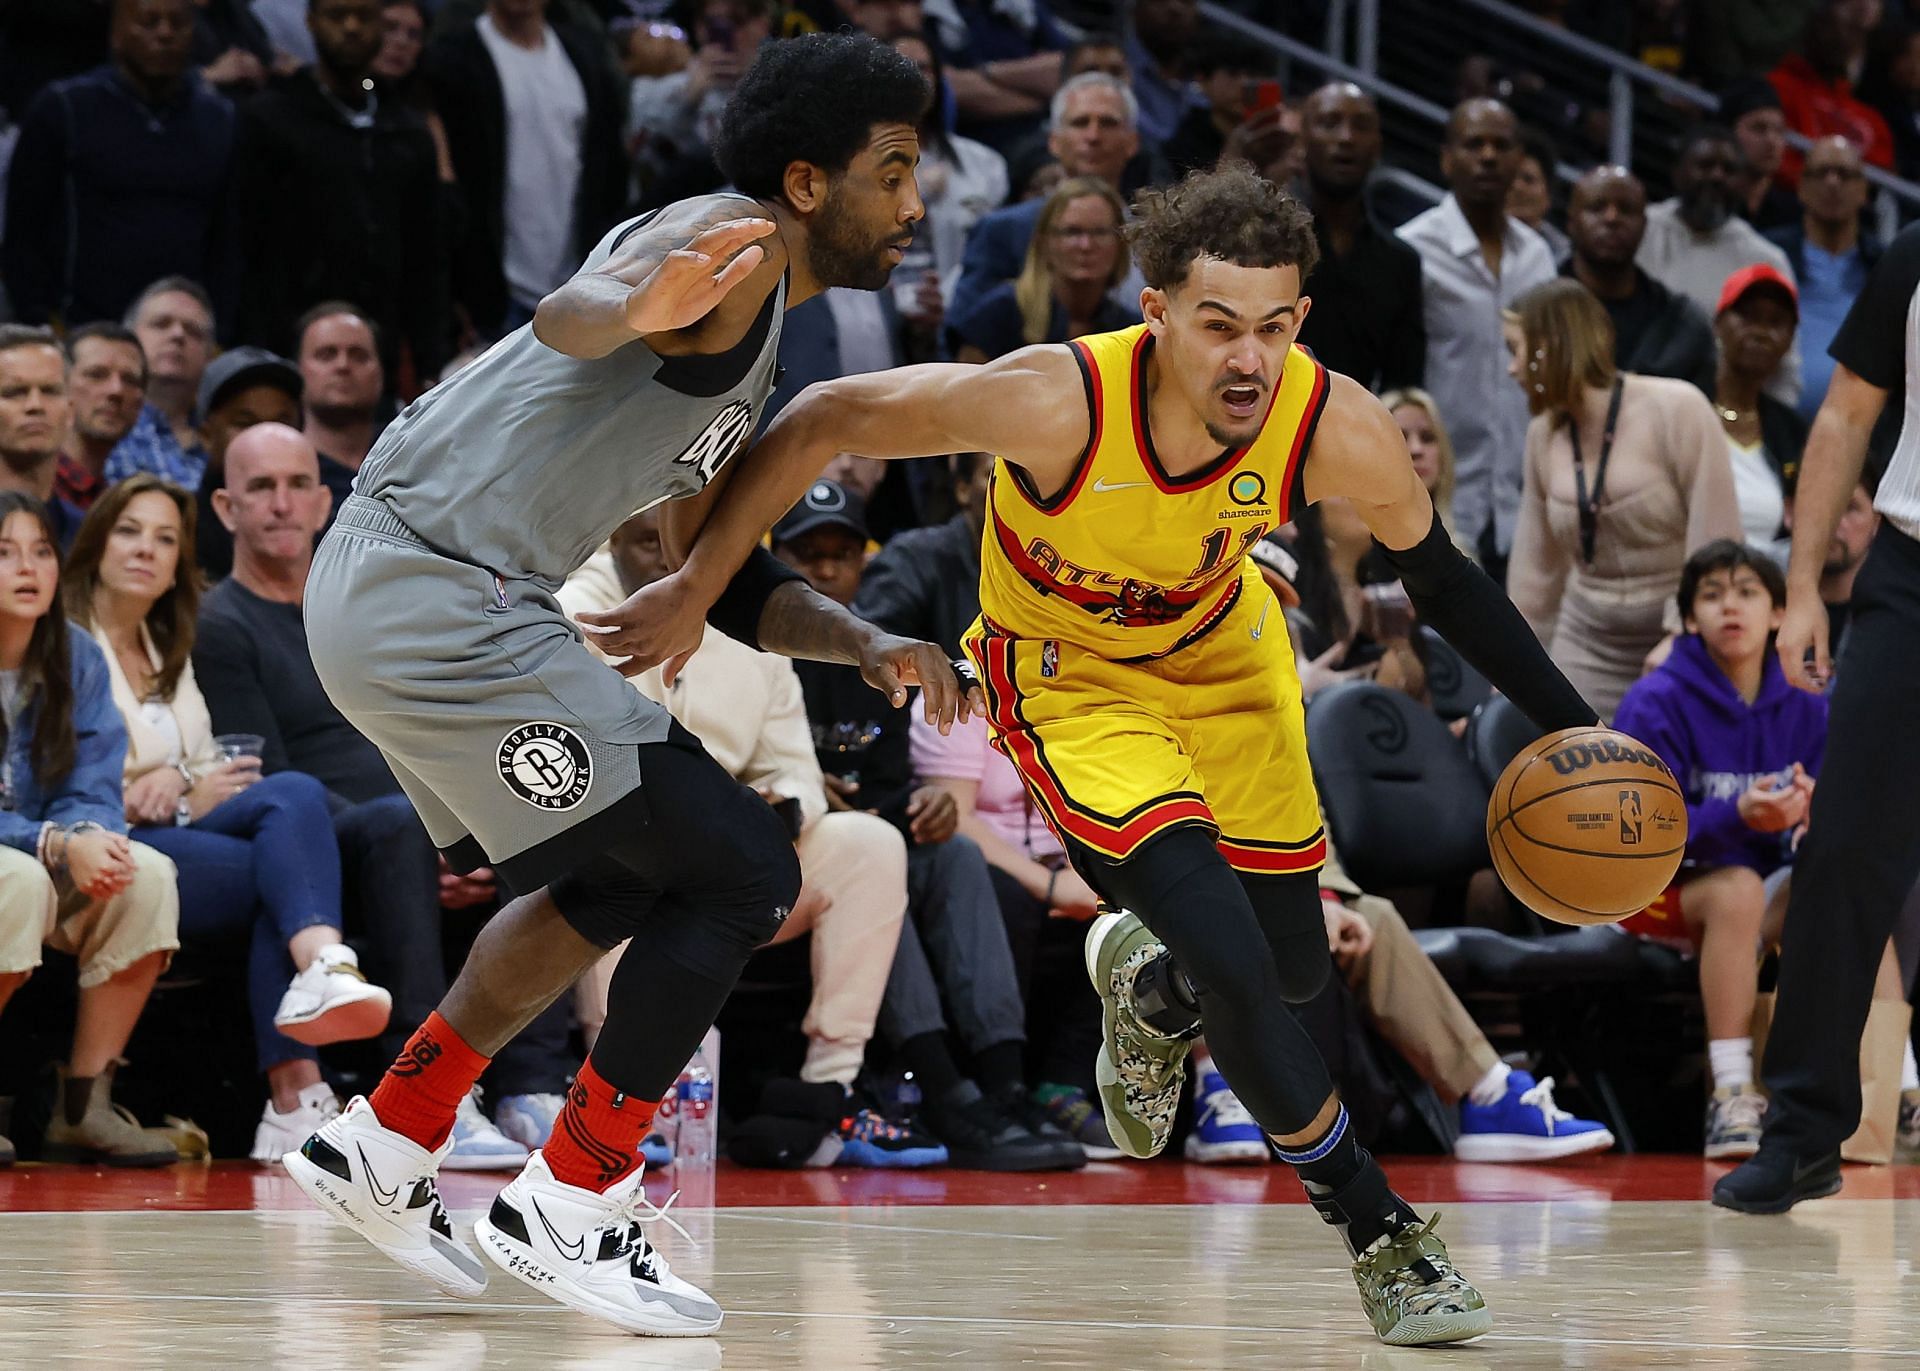 Kyrie Irving of the Brooklyn Nets (left) and Trae Young of the Atlanta Hawks in action during a 2021-22 NBA regular season game